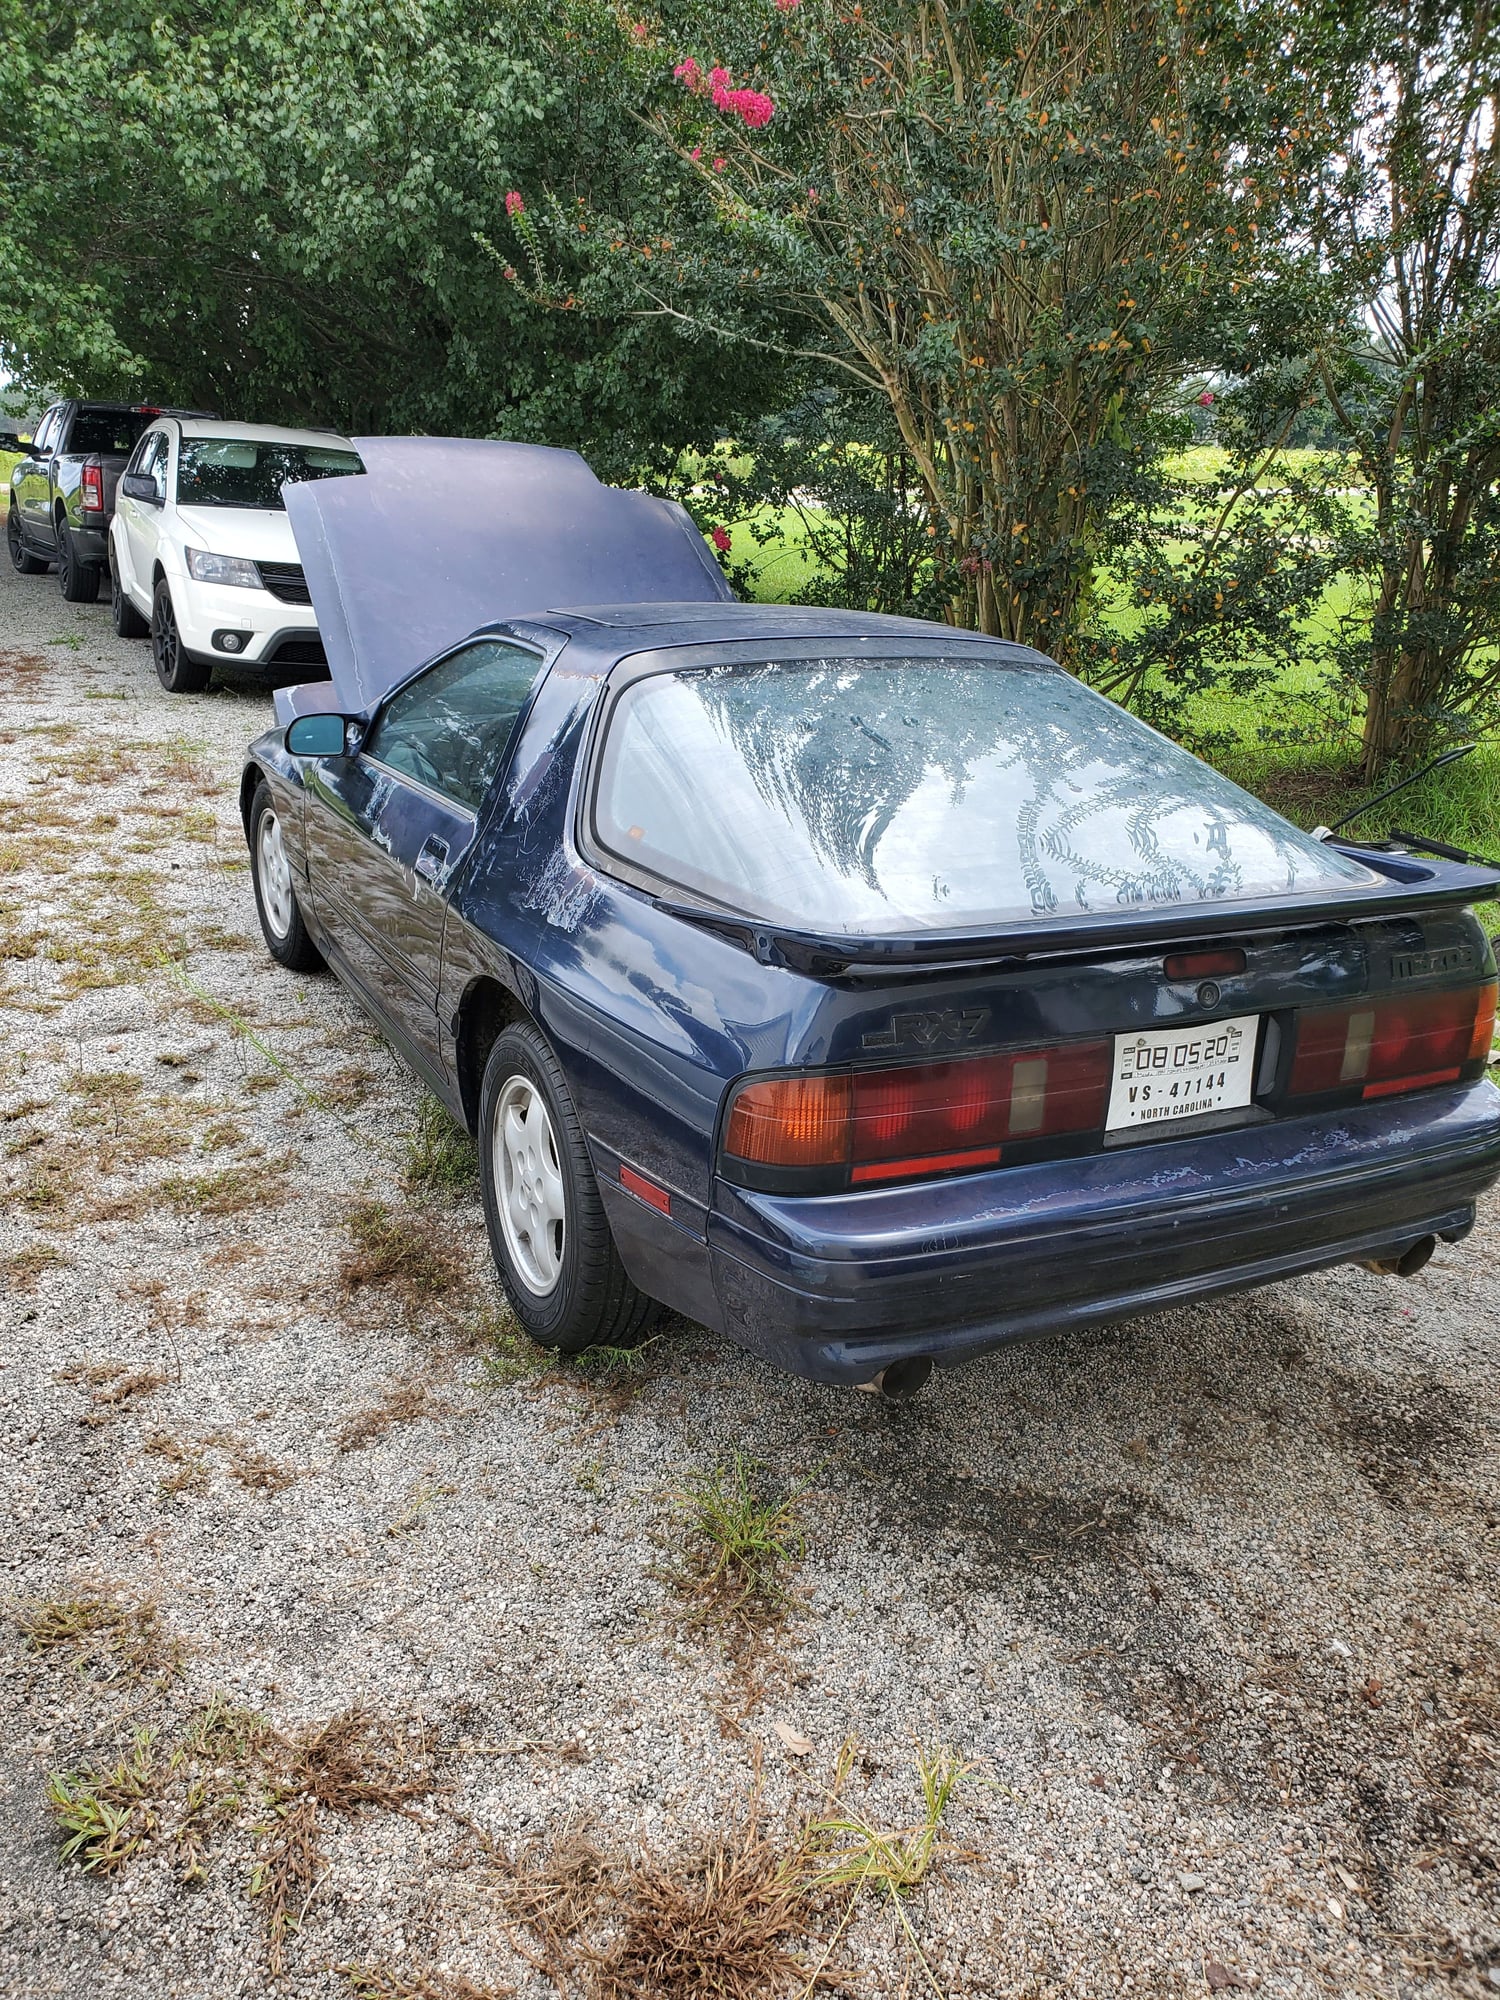 1991 Mazda RX-7 - 1991 Mazda RX7 coupe - Used - VIN JM1FC3310M0901091 - 110,000 Miles - Other - 2WD - Manual - Coupe - Blue - Princeton, NC 27569, United States